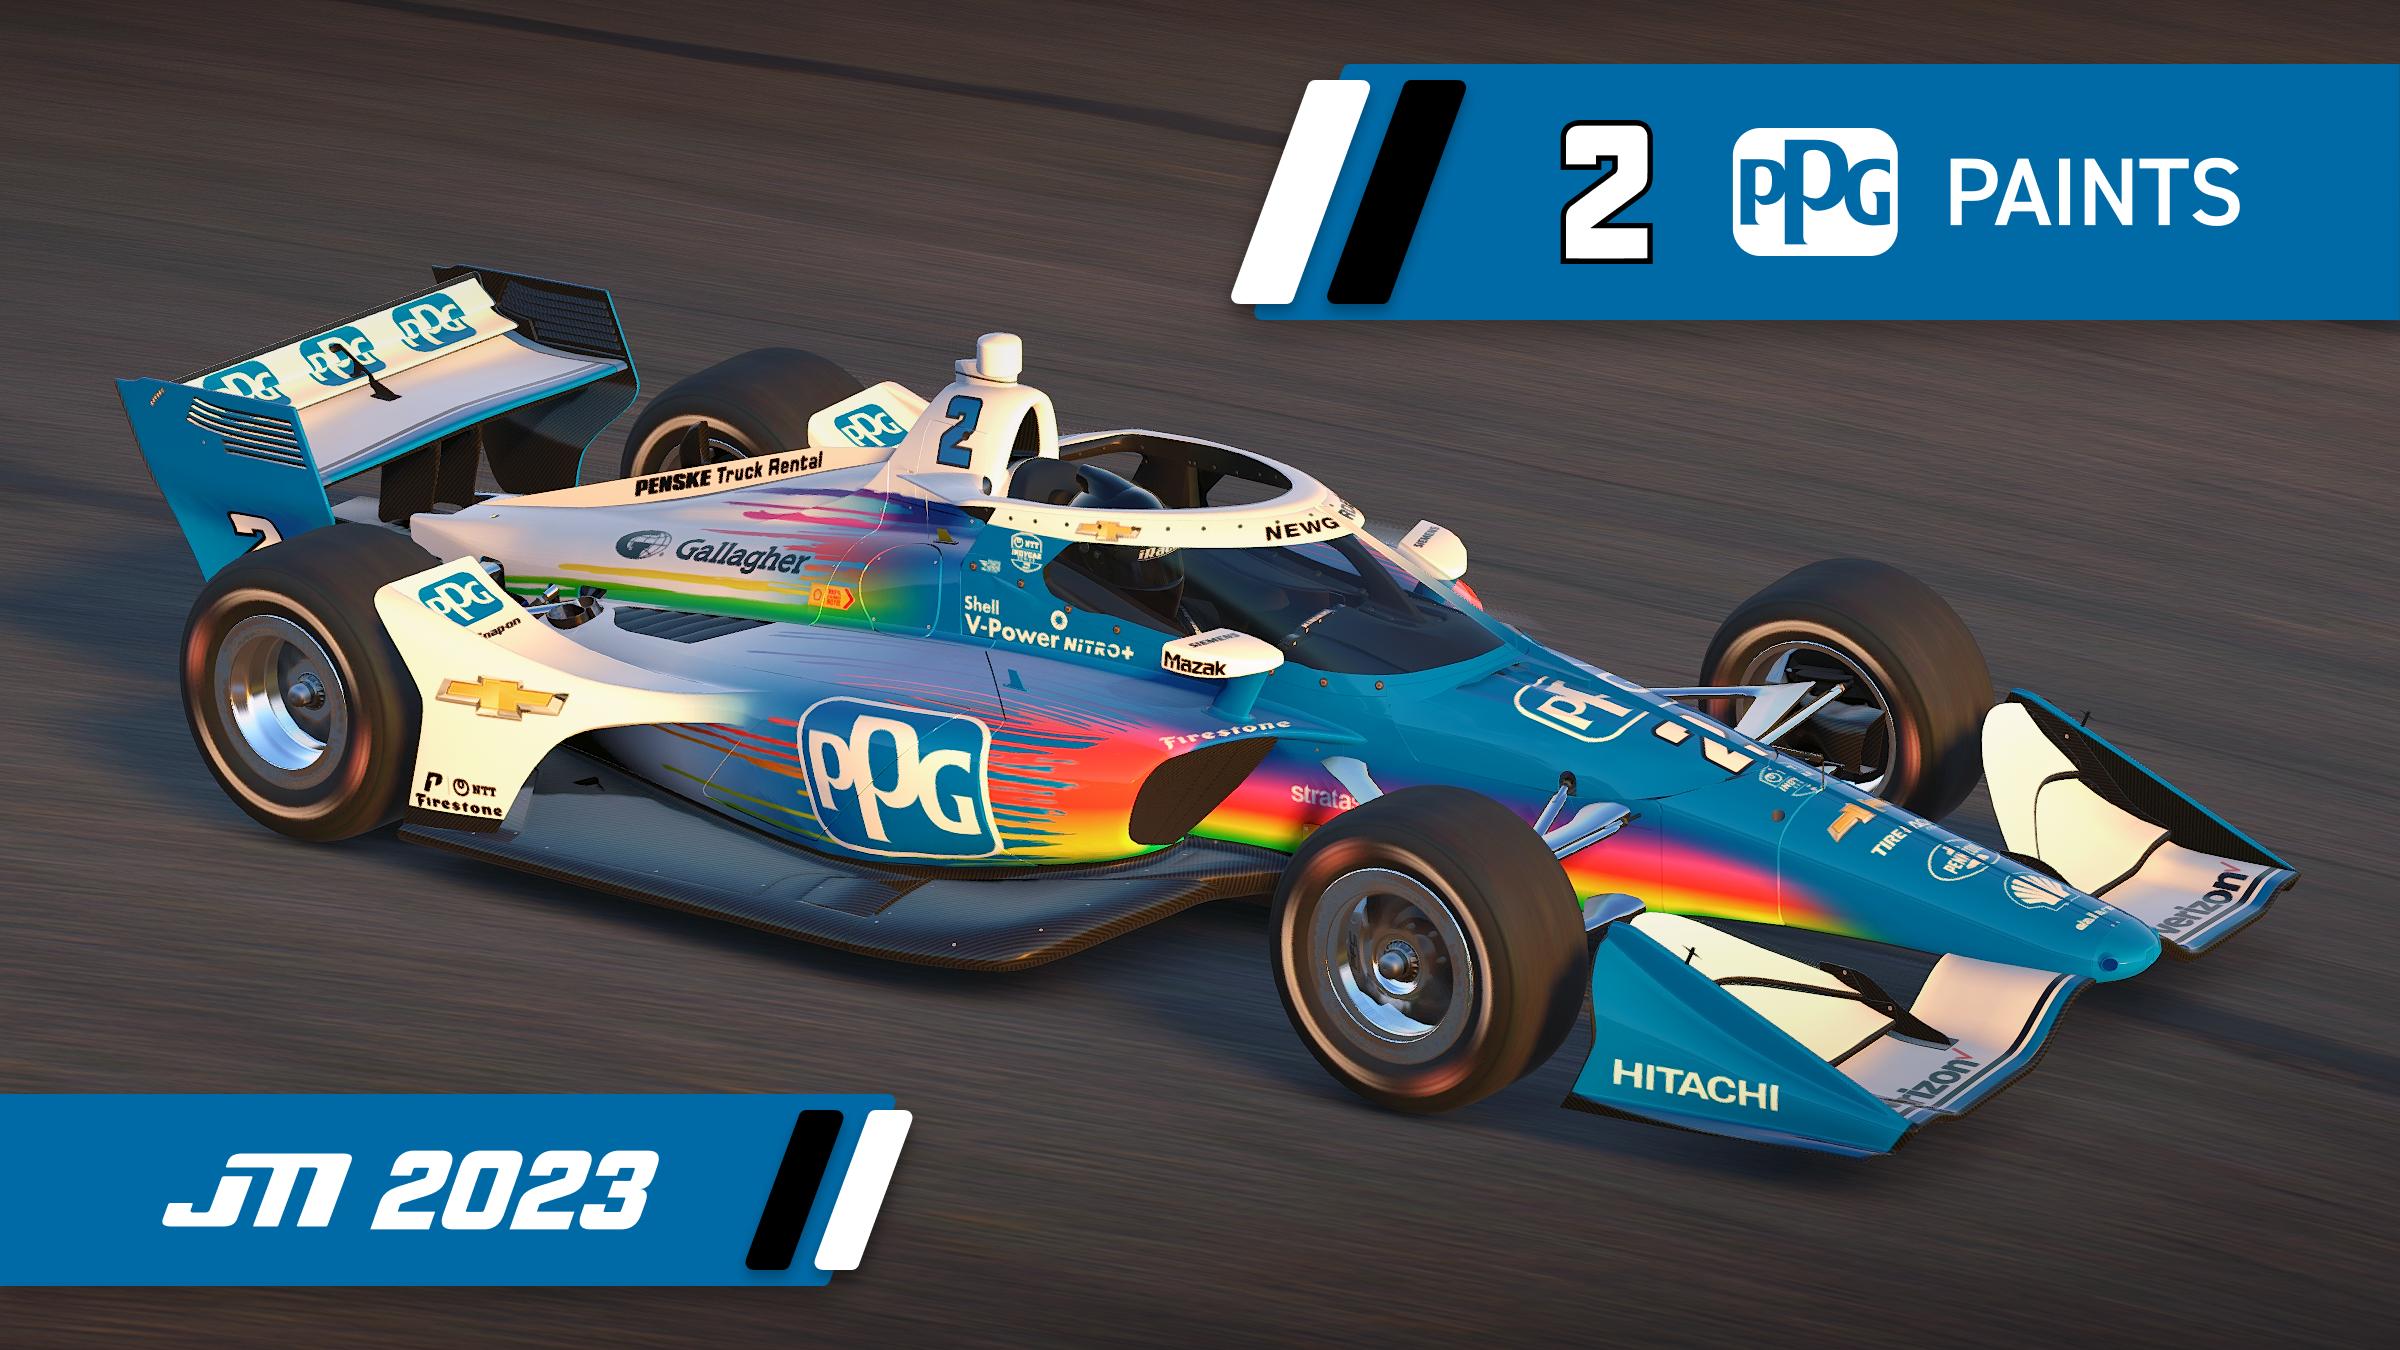 Preview of 2023 Josef Newgarden #2 PPG Dallara IR18 with Custom Number by Jeff McKeand